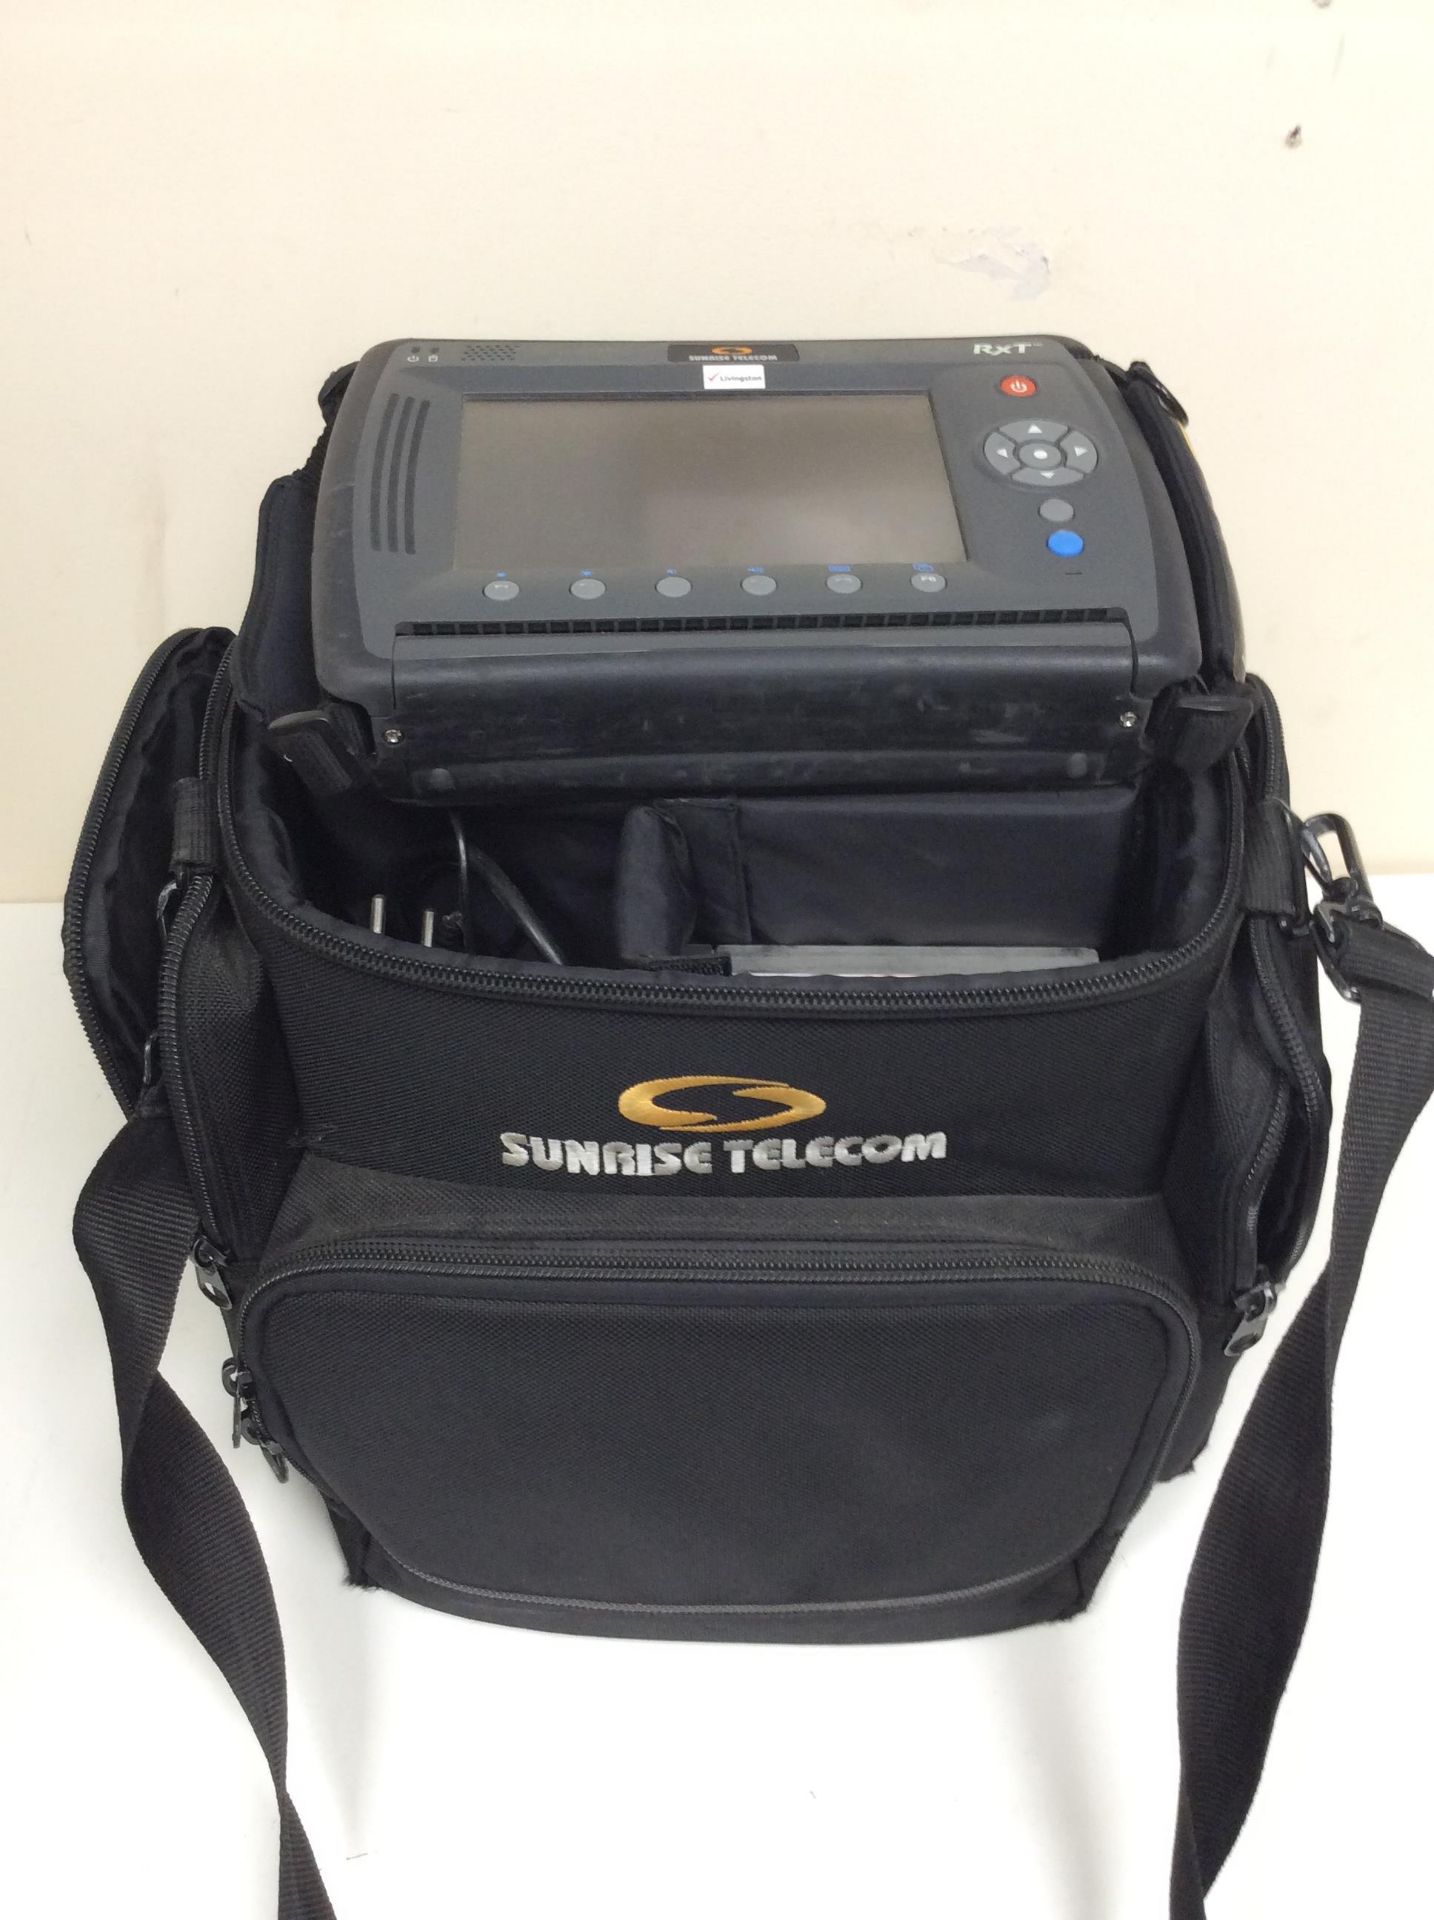 Sunrise telecom rxt2000a tdr dmm dsl test meter time domain reflectometer with 2 modules